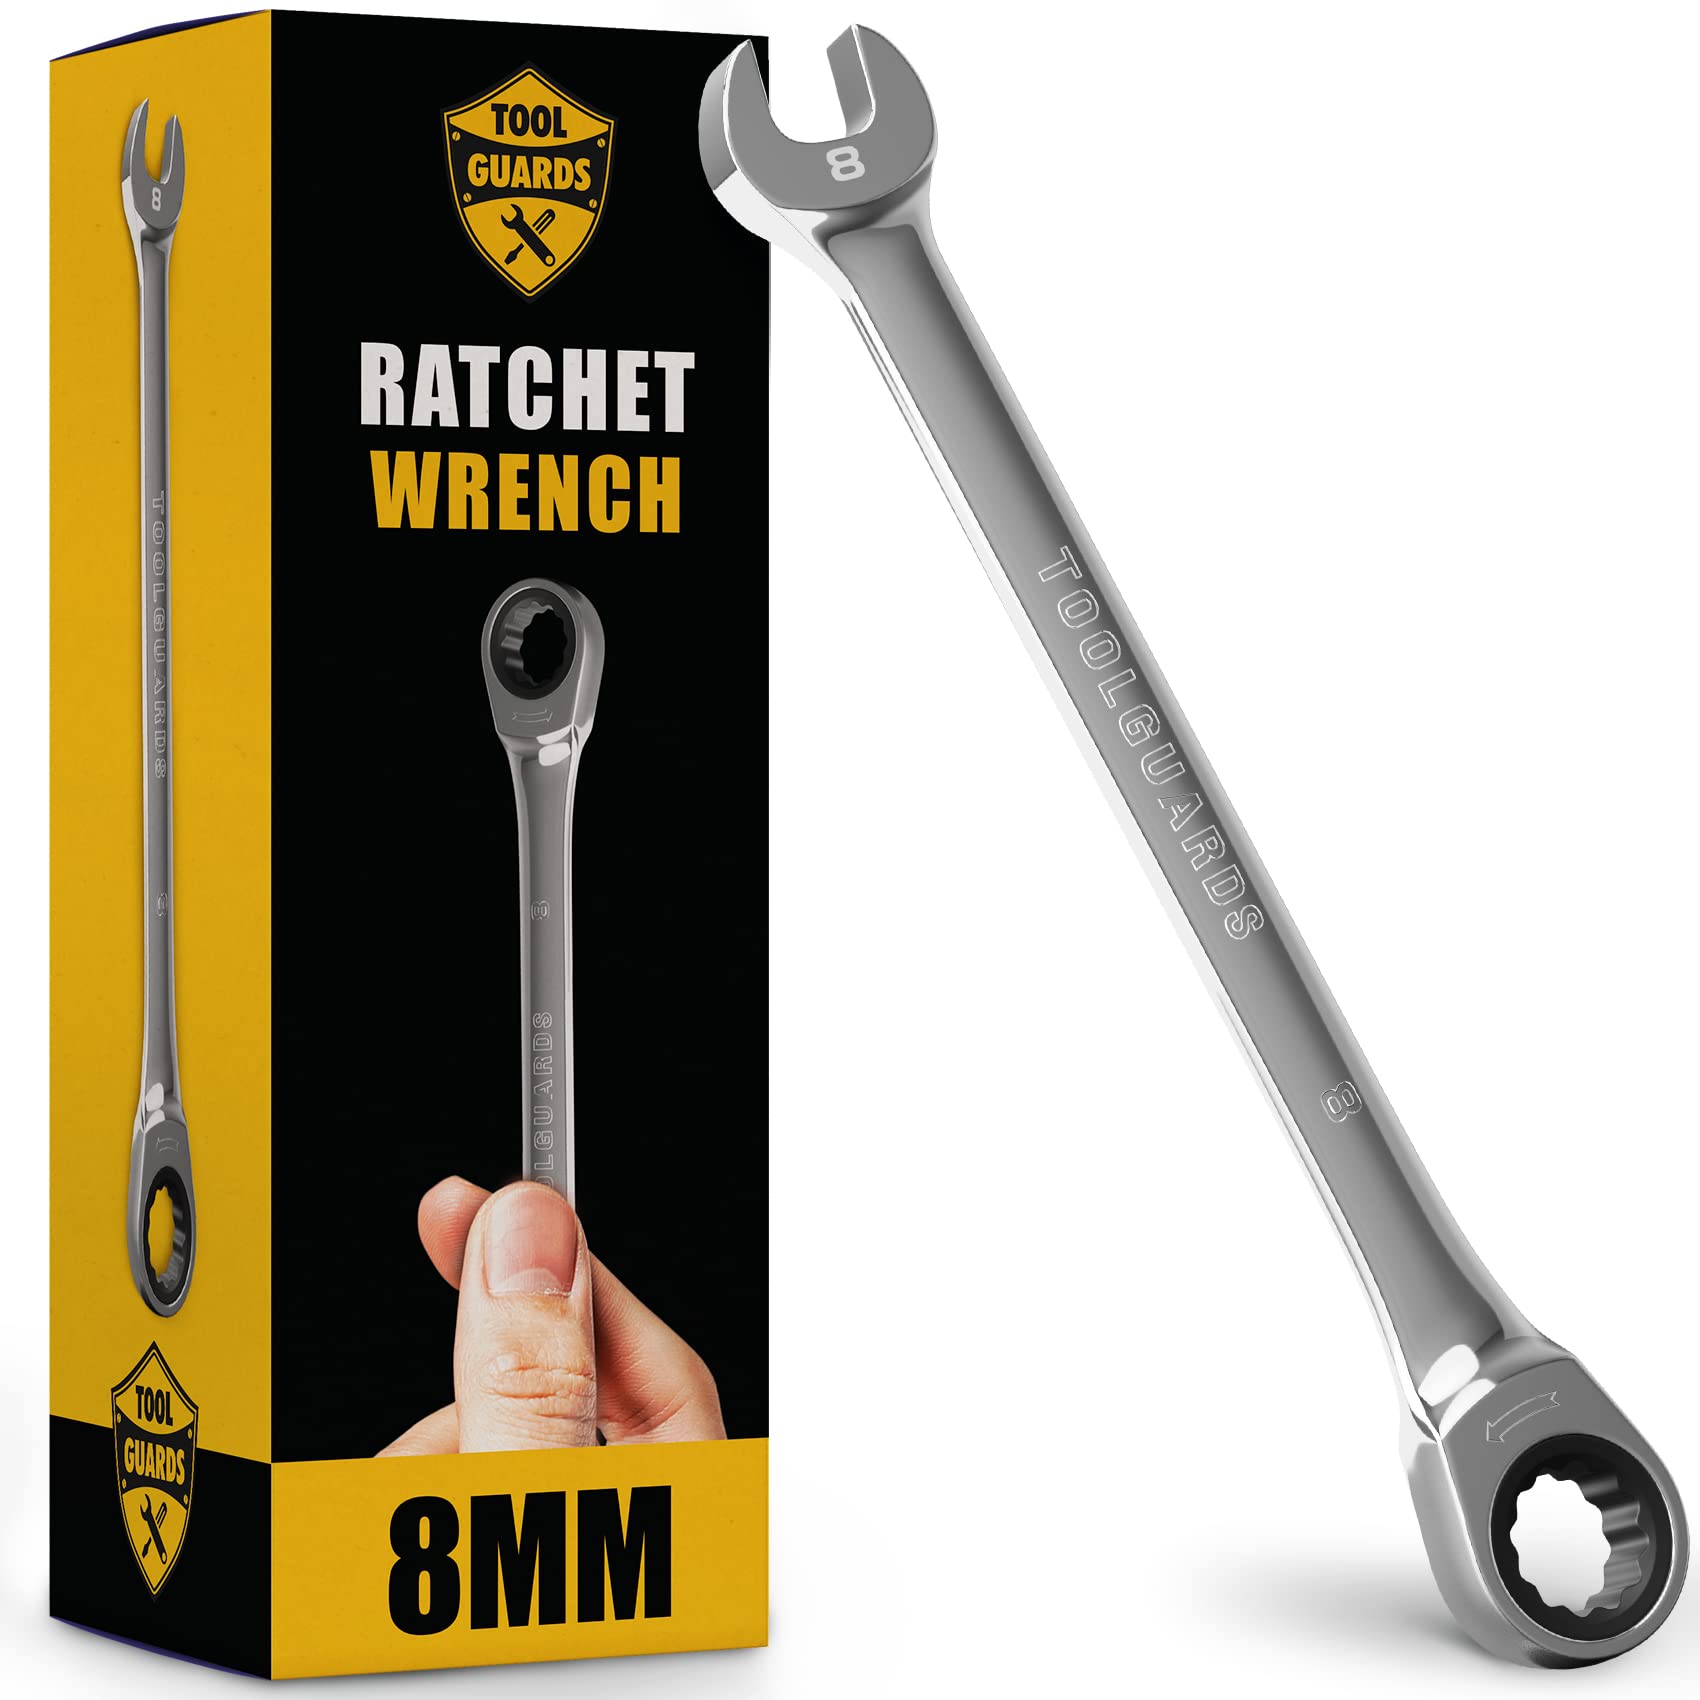 TOOLgUARDS Ratcheting Wrench Set 8mm Wrench Slim Design Ratchet Wrench- 100 Lifetime Satisfaction guarantee